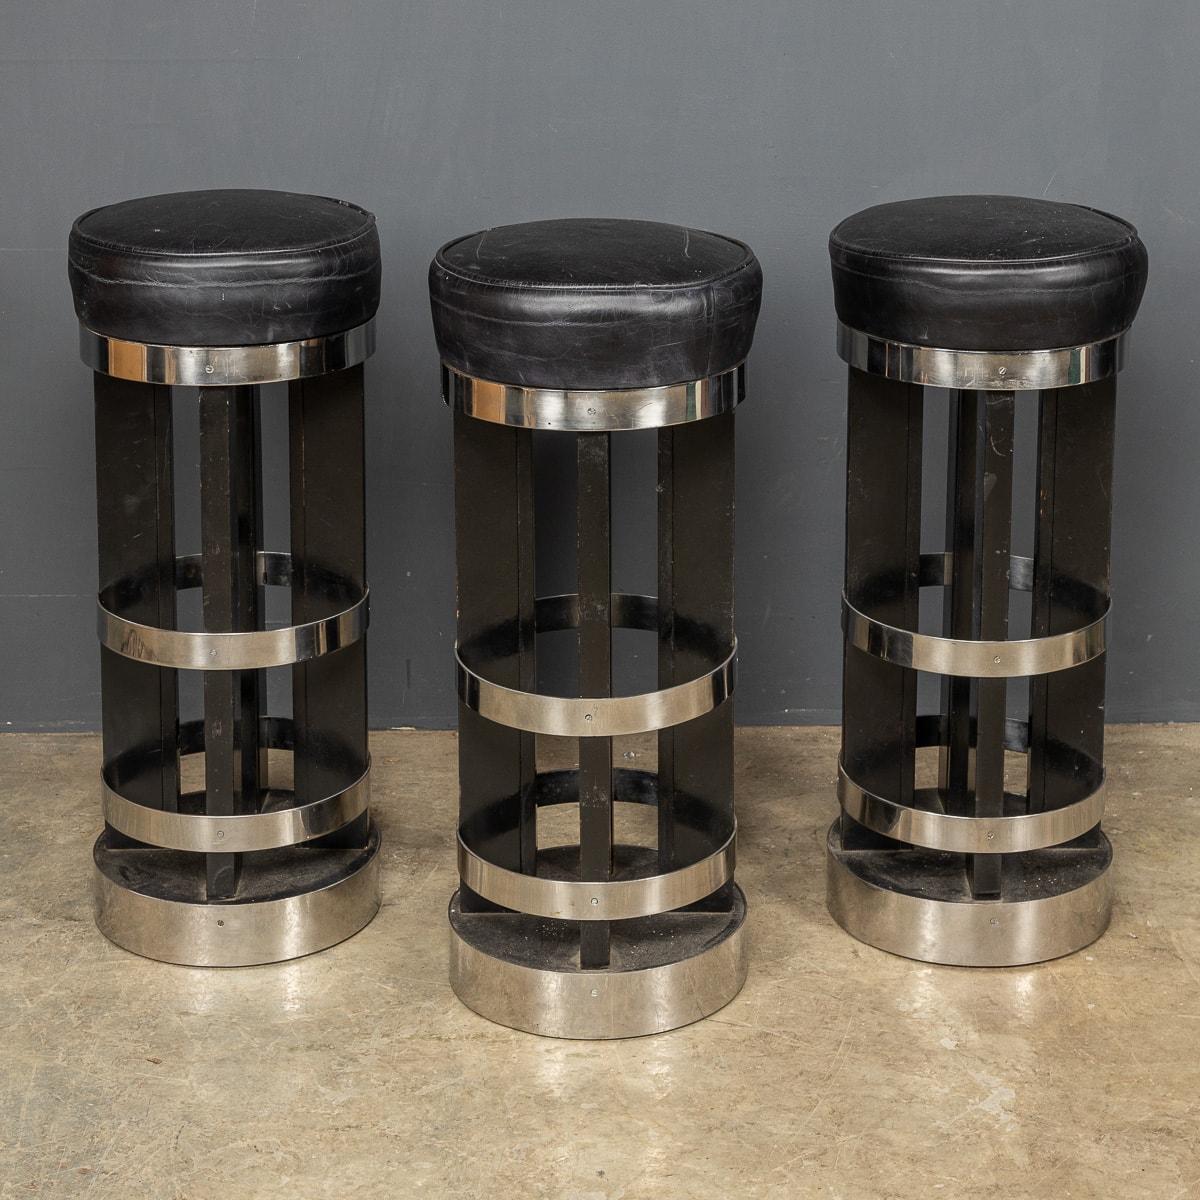 A mid 20th Century set of three leather and chrome swivel top bar stools straight from an iconic American diner.

CONDITION
In Great Condition - The leather has some wear consistent with age

SIZE
Height: 80cm
Diameter: 35cm.